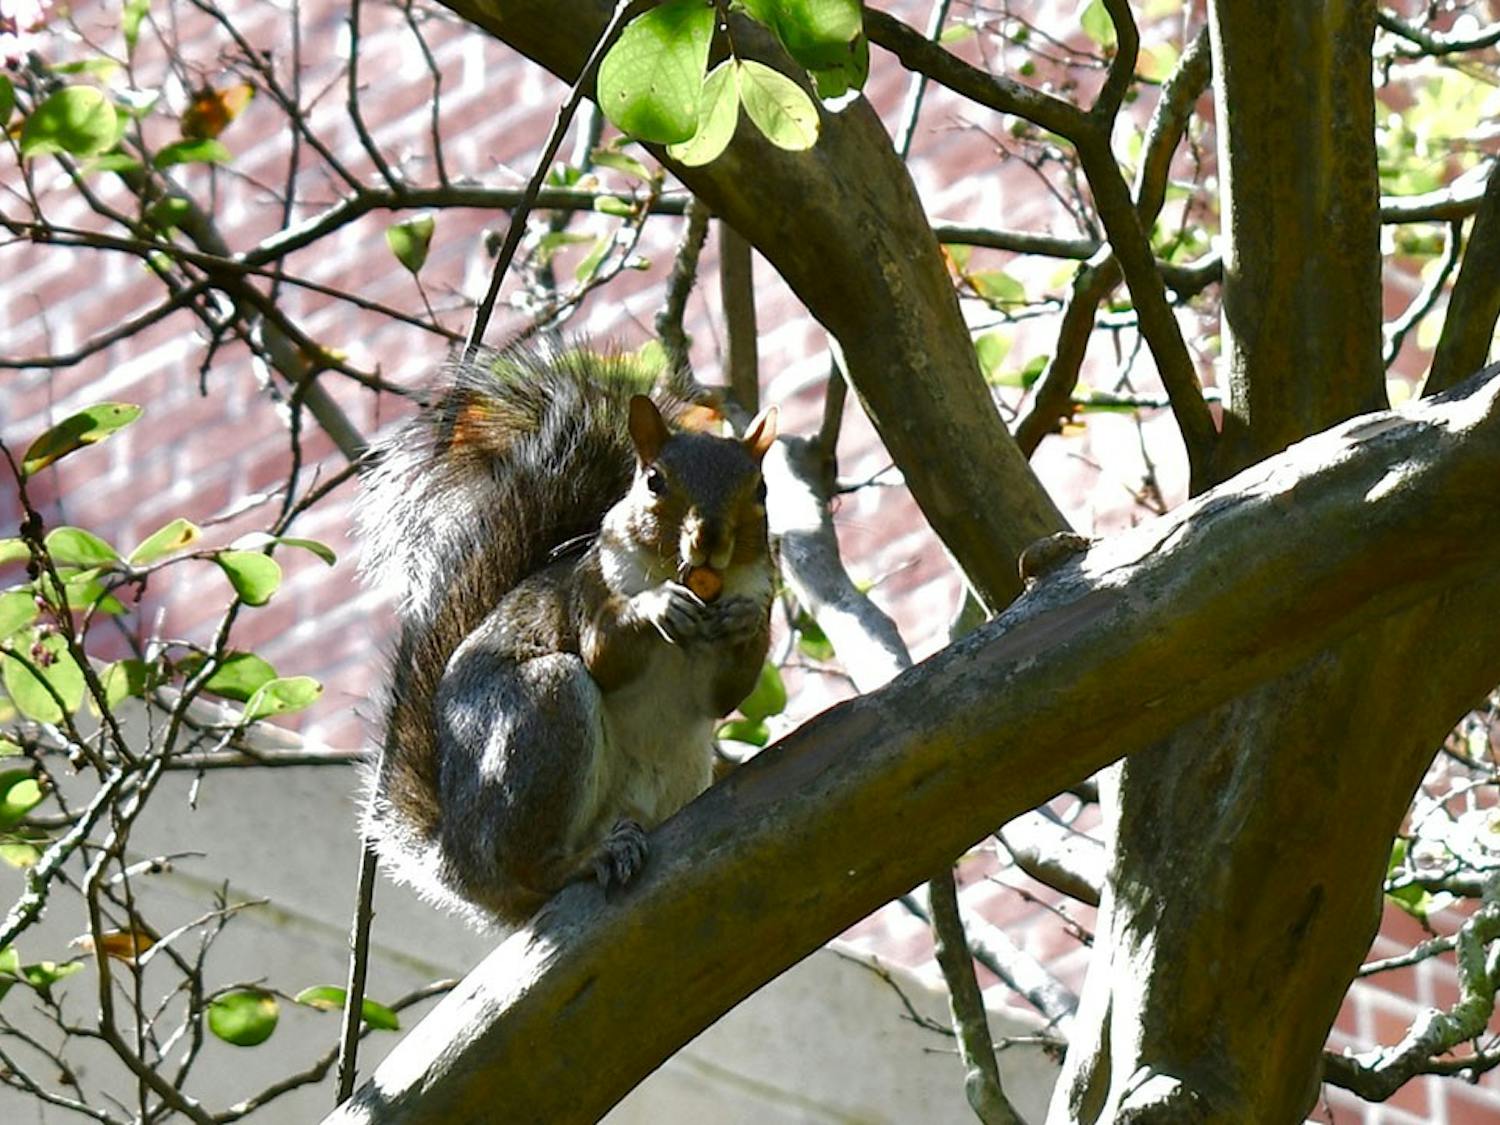 One of the campus squirrels eats a nut while sitting on a tree branch outside of Russell House.